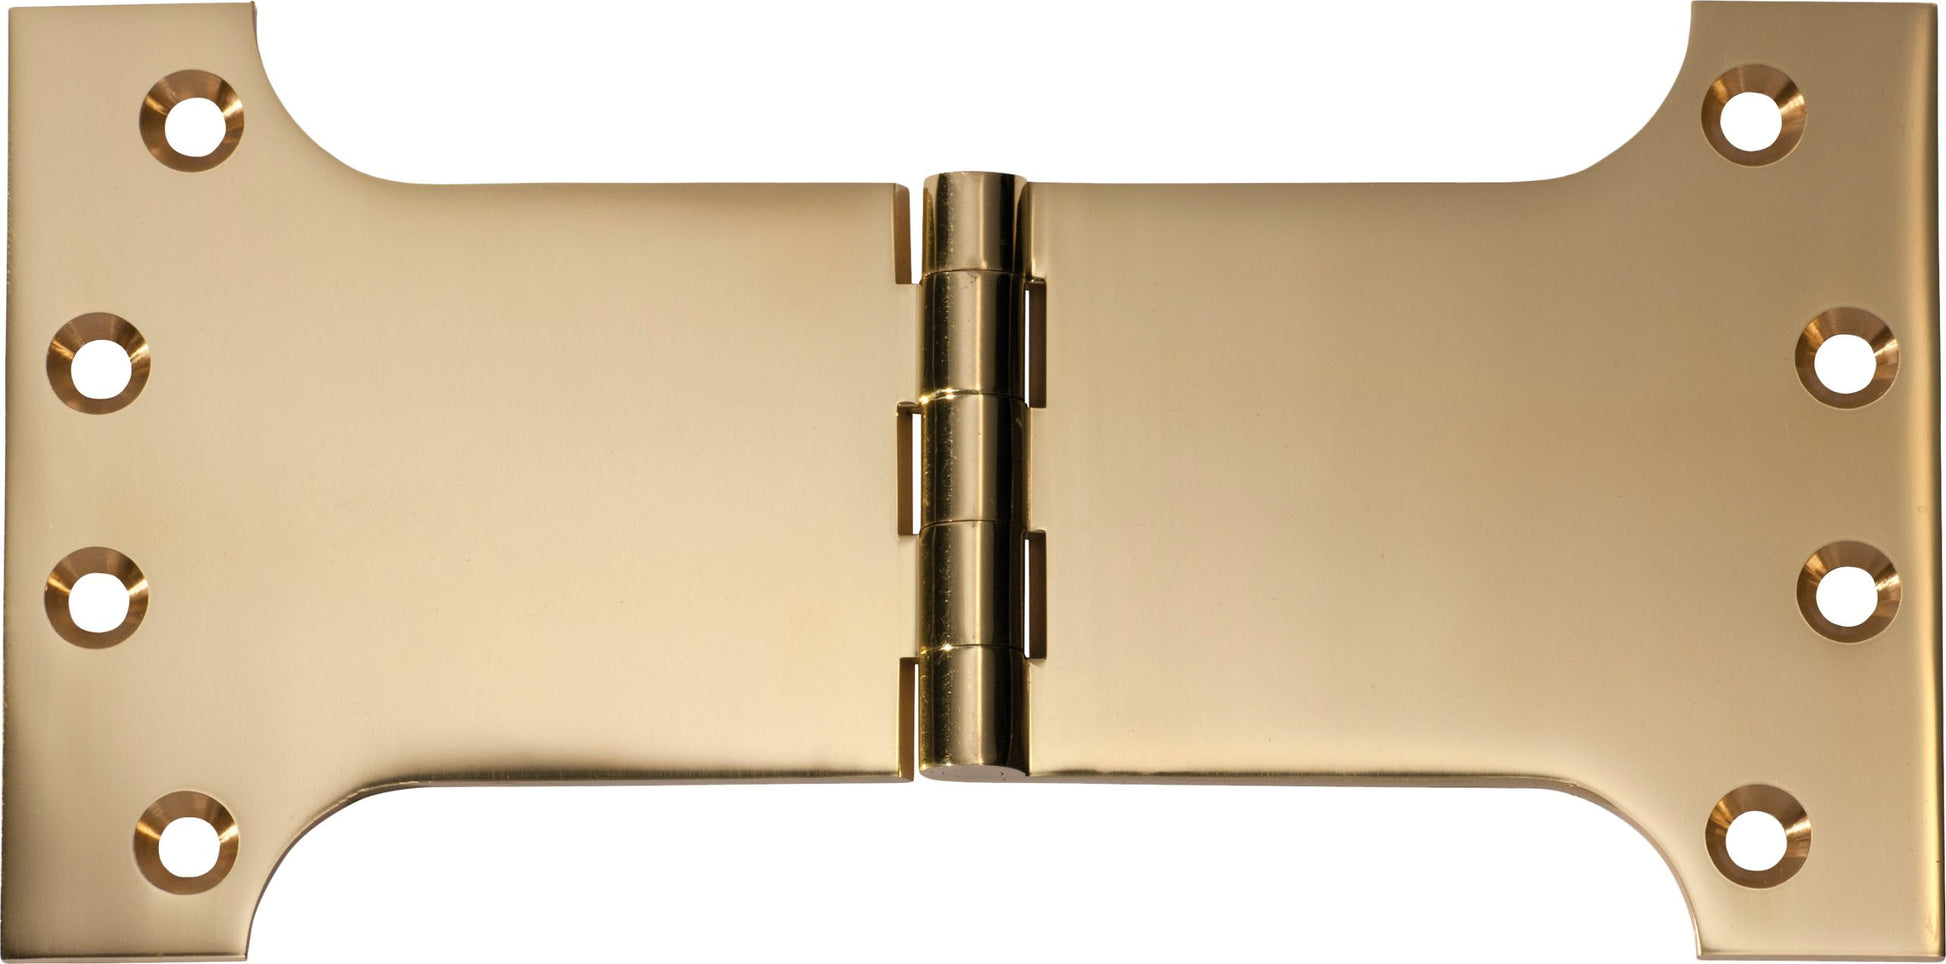 Tradco Shutter Parliament Hinge Polished Brass H100xW200xT4mm in Polished Brass